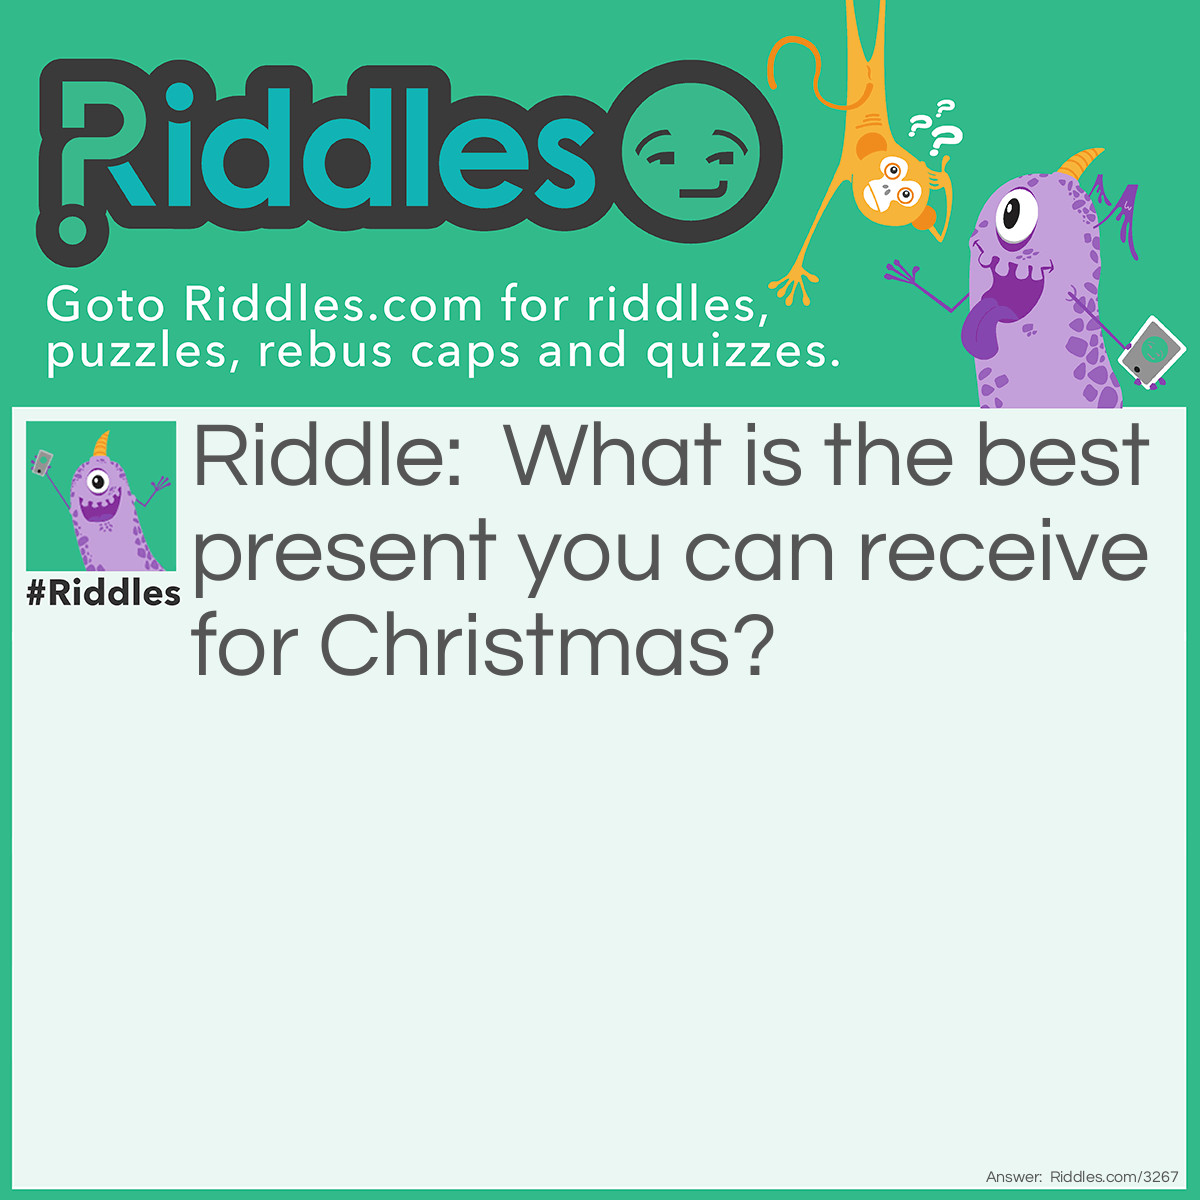 Riddle: What is the best present you can receive for <a href="/quiz/christmas-riddles">Christmas</a>? Answer: A broken drum.  You just can't beat it!